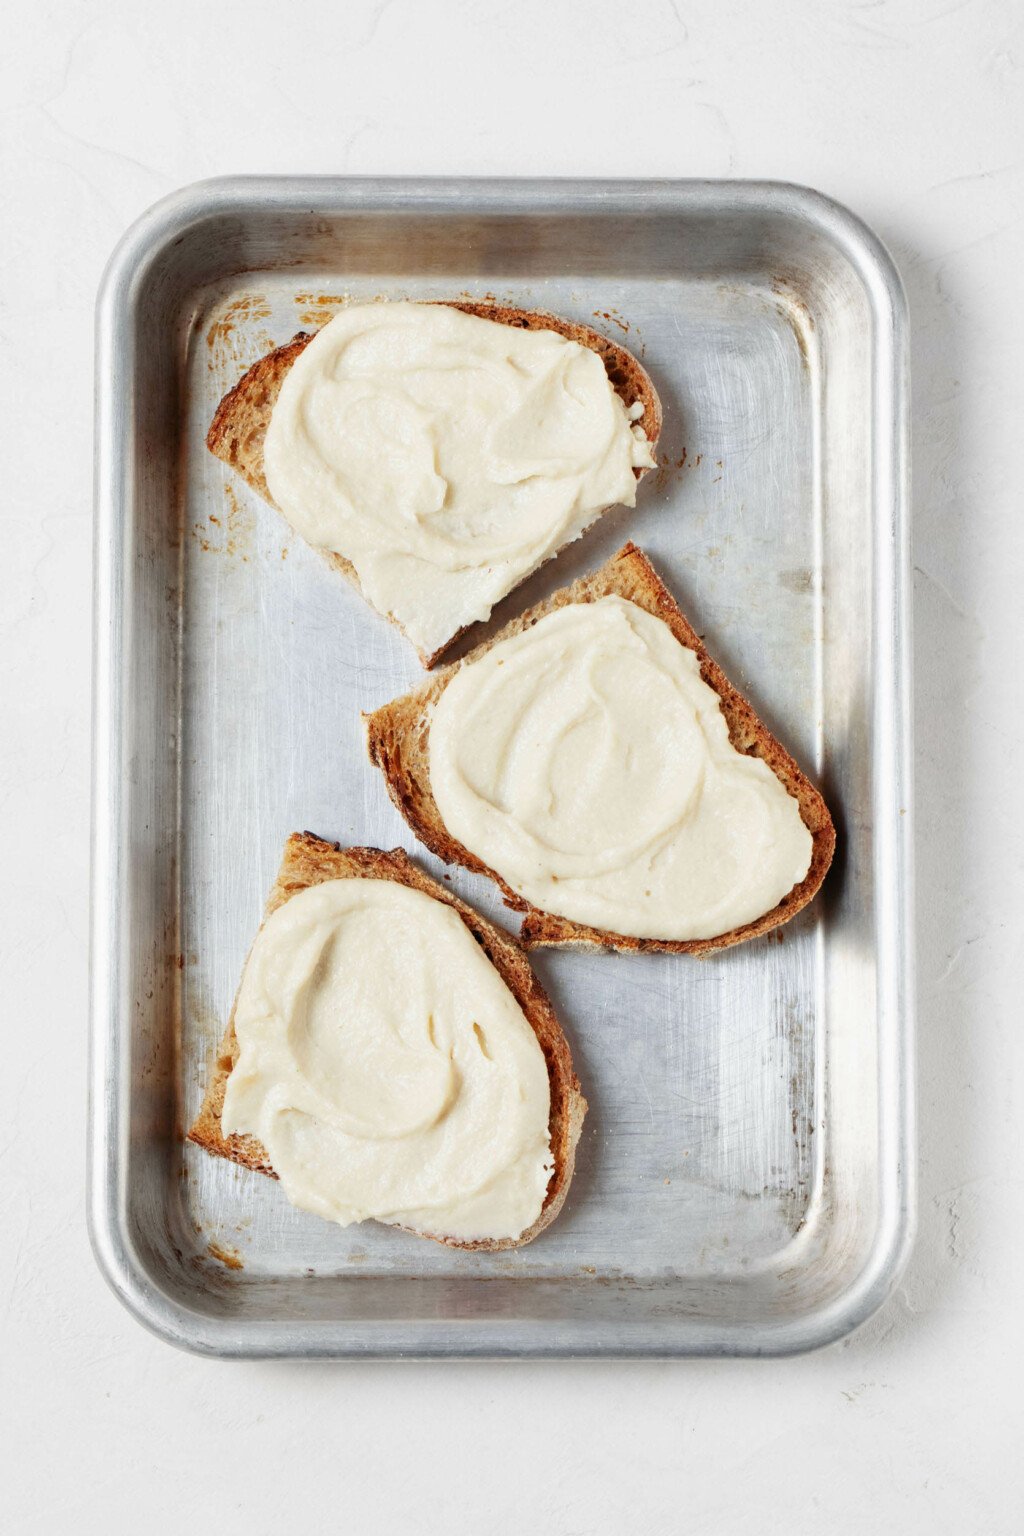 Slices of toast have been topped with a soft, creamy plant-based cheese.